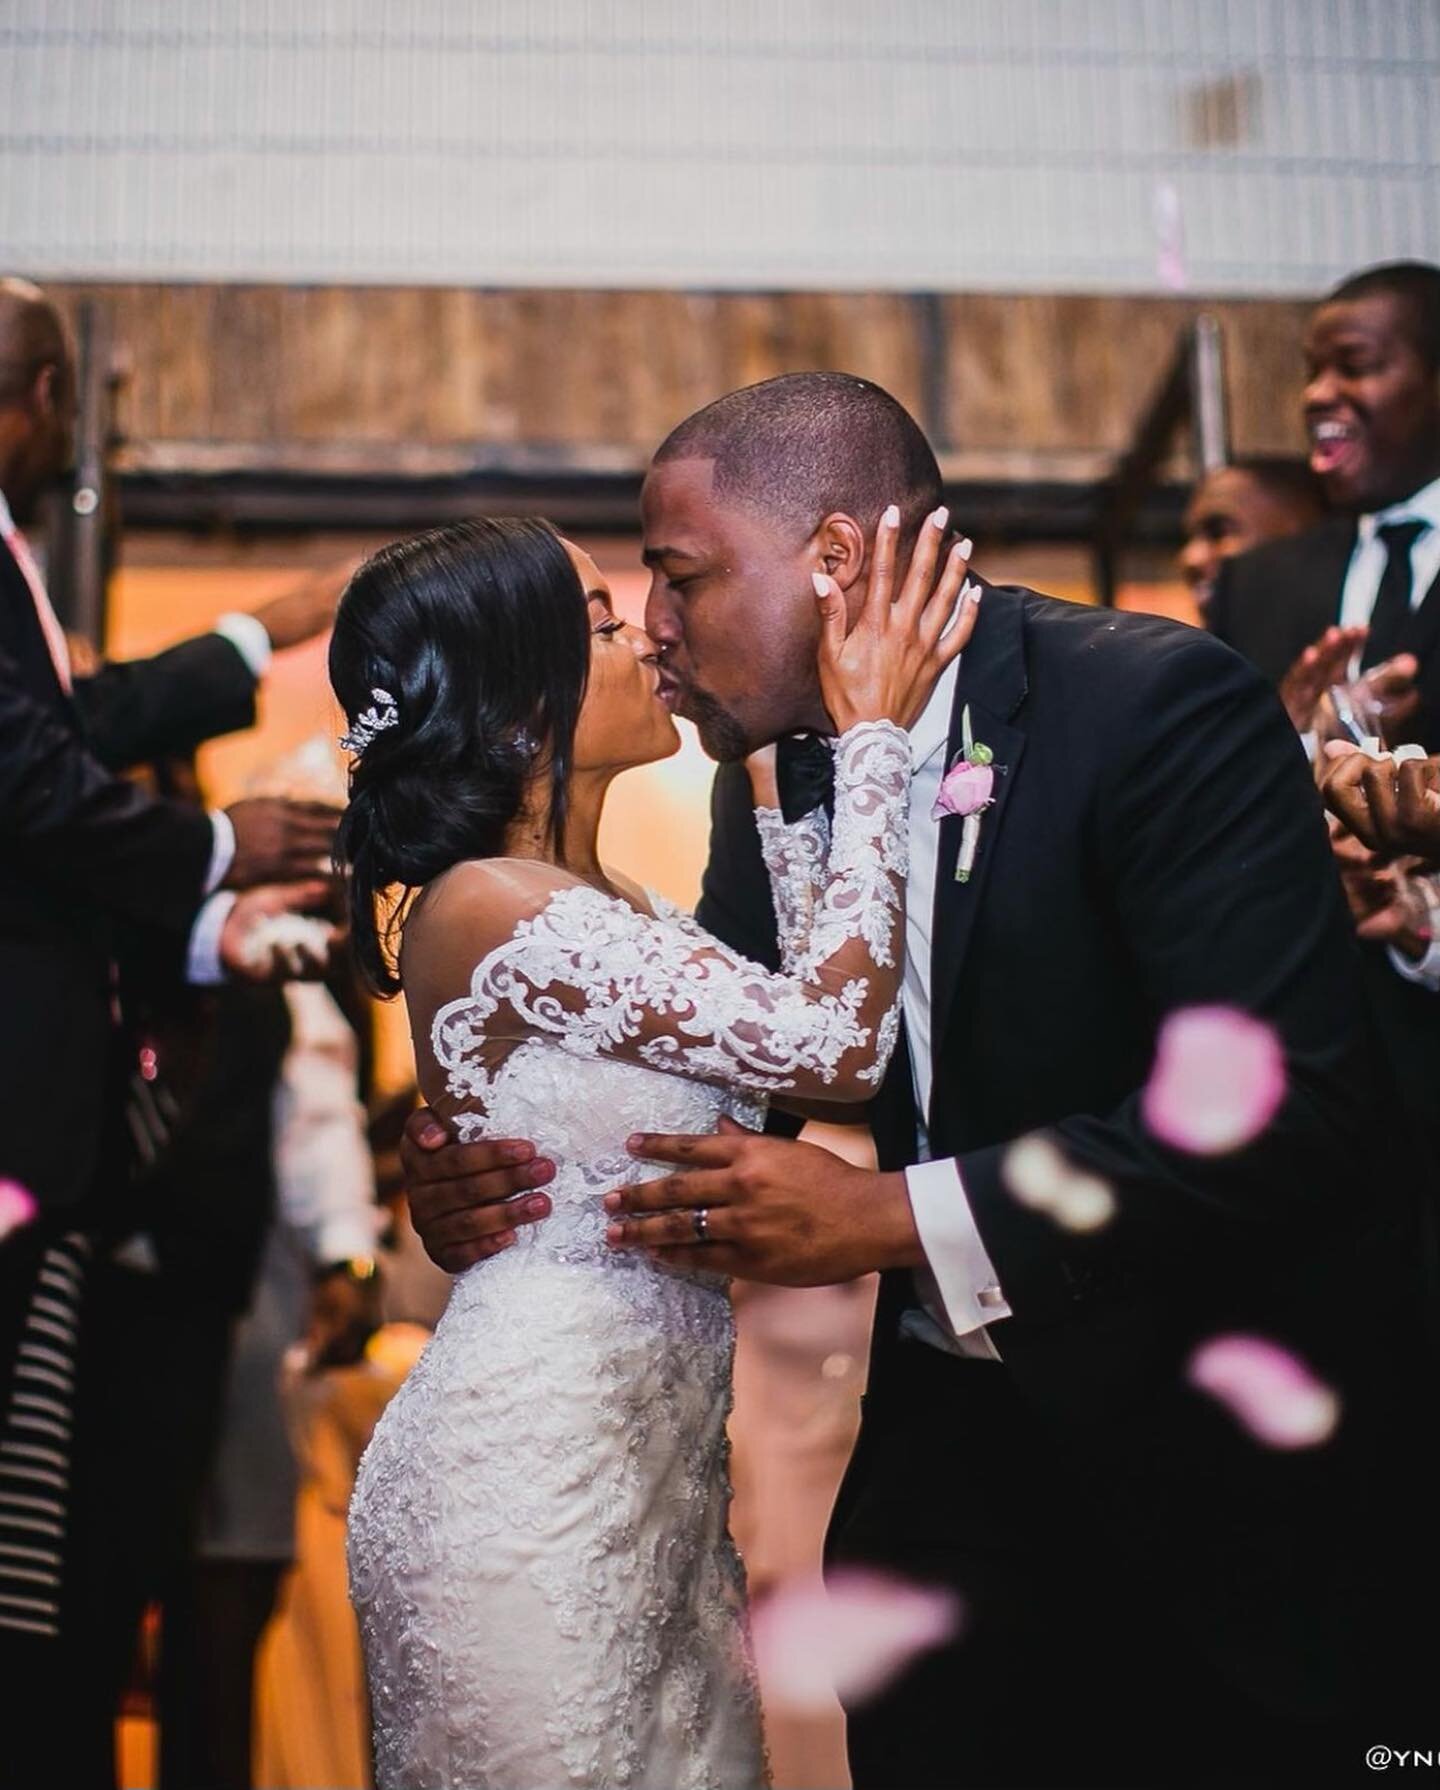 That moment when time stops and everything feels absolutely perfect 💕 From start to finish, this day was the most beautiful celebration of this sweet couple!
Photo: @ynot_images 
&bull;
&bull;
&bull;
#soireeeventgallery #alabamaweddings #birminghama